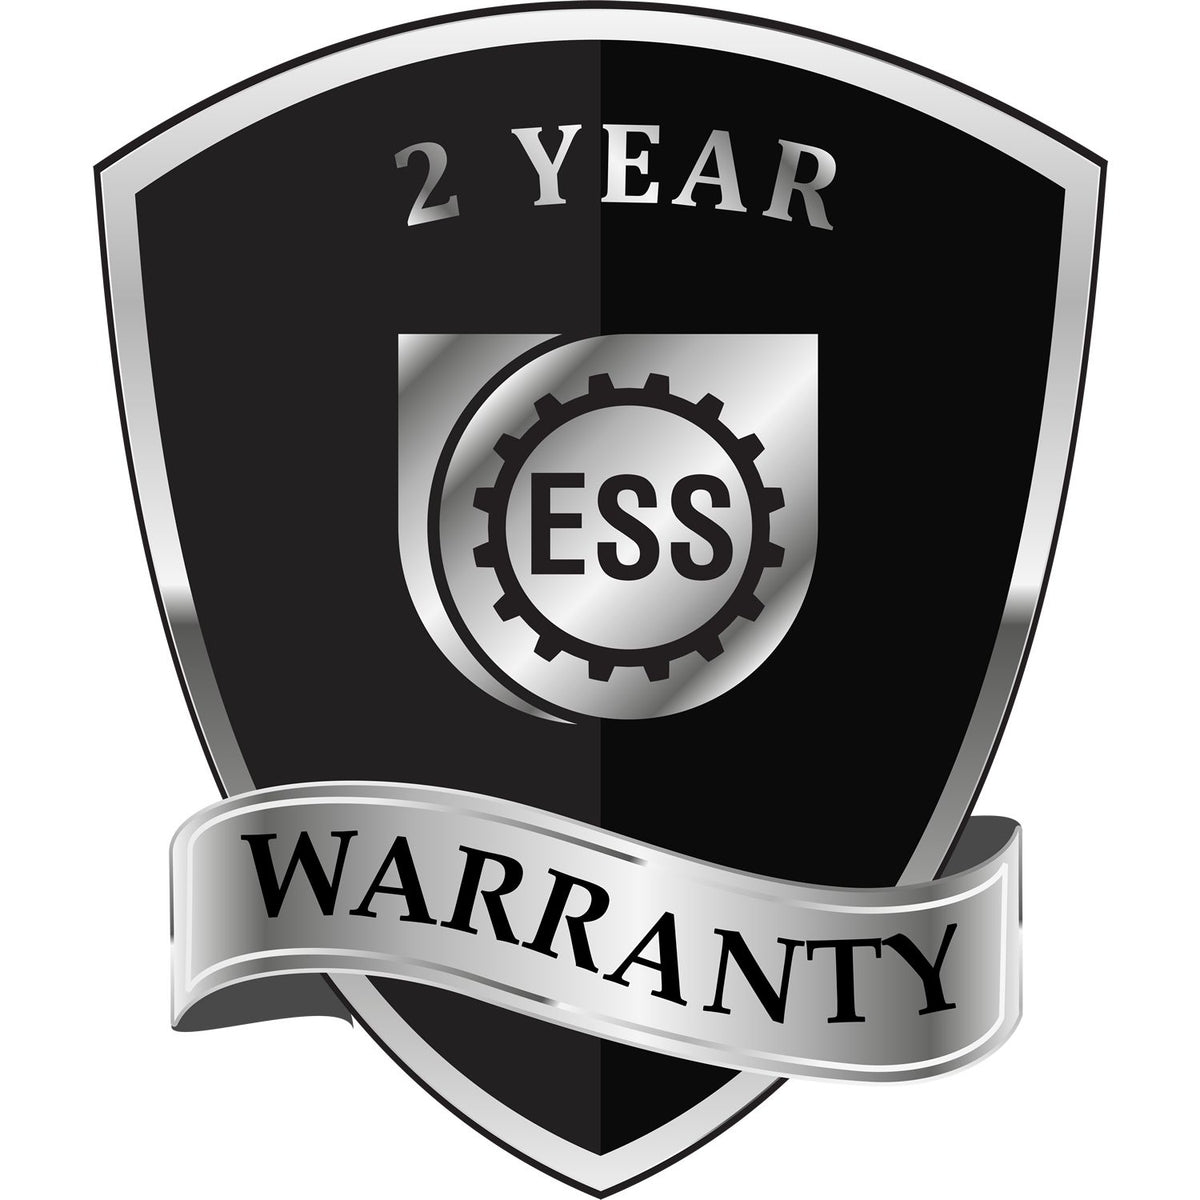 A black and silver badge or emblem showing warranty information for the Hybrid New Hampshire Geologist Seal